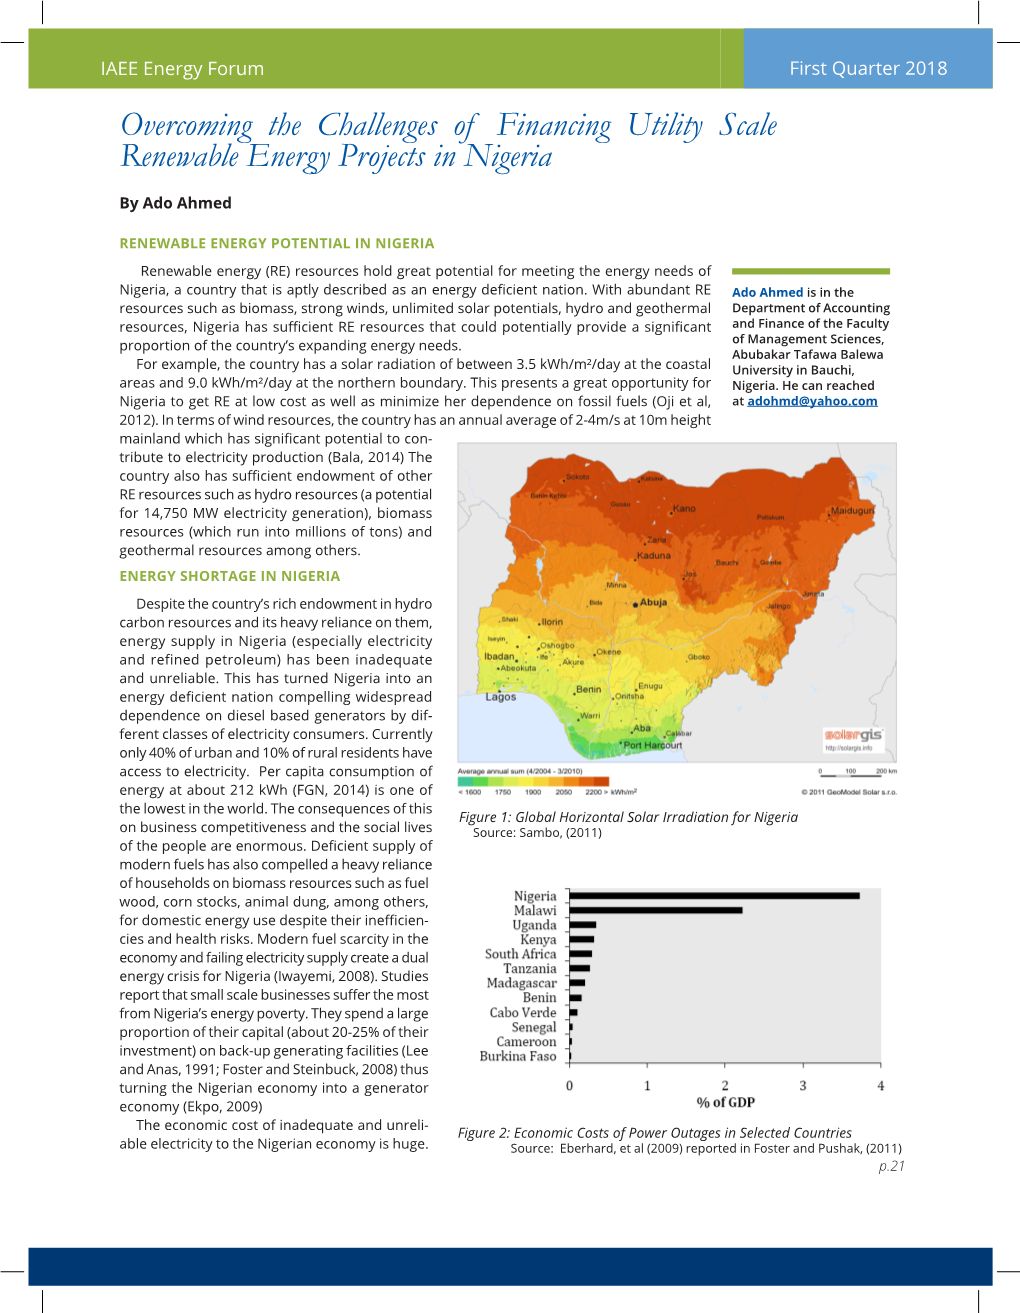 Overcoming the Challenges of Financing Utility Scale Renewable Energy Projects in Nigeria